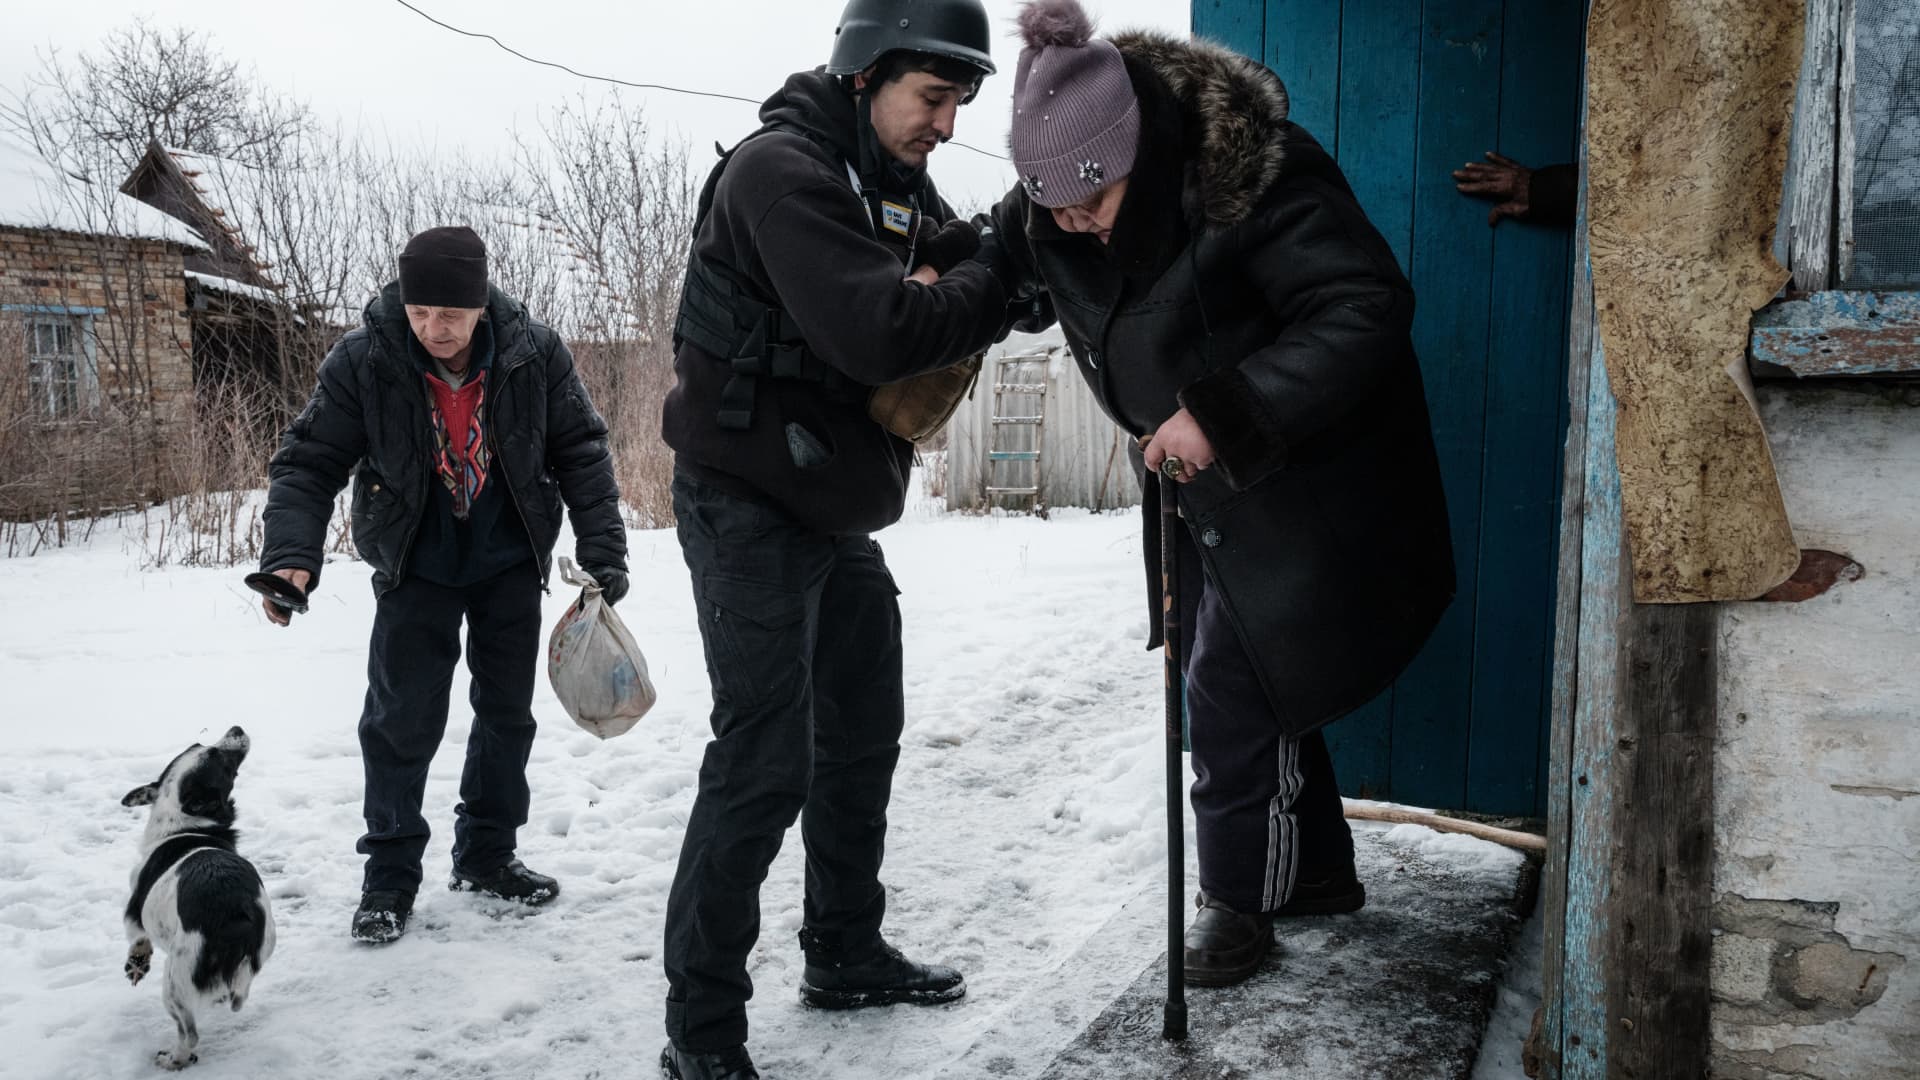 A volunteer Andrey (C), 38, helps Lydia Ivanovna (R), 62, to evacuate in Chasiv Yar on February 15, 2023, amid the Russian invasion of Ukraine.